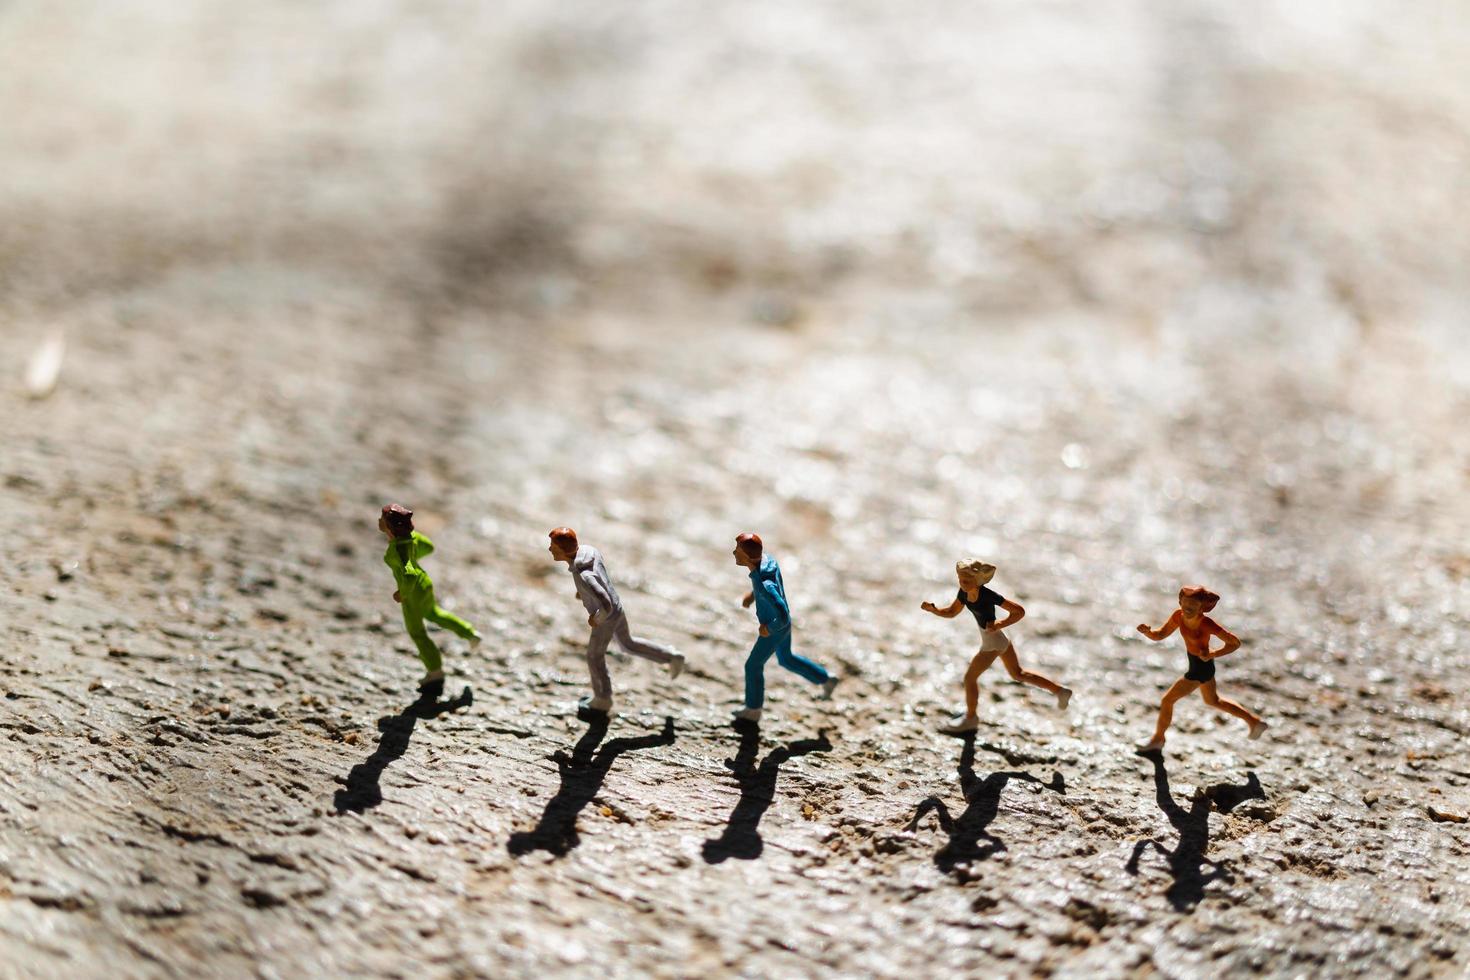 Miniature group of people running on a concrete floor, healthy lifestyle concept photo